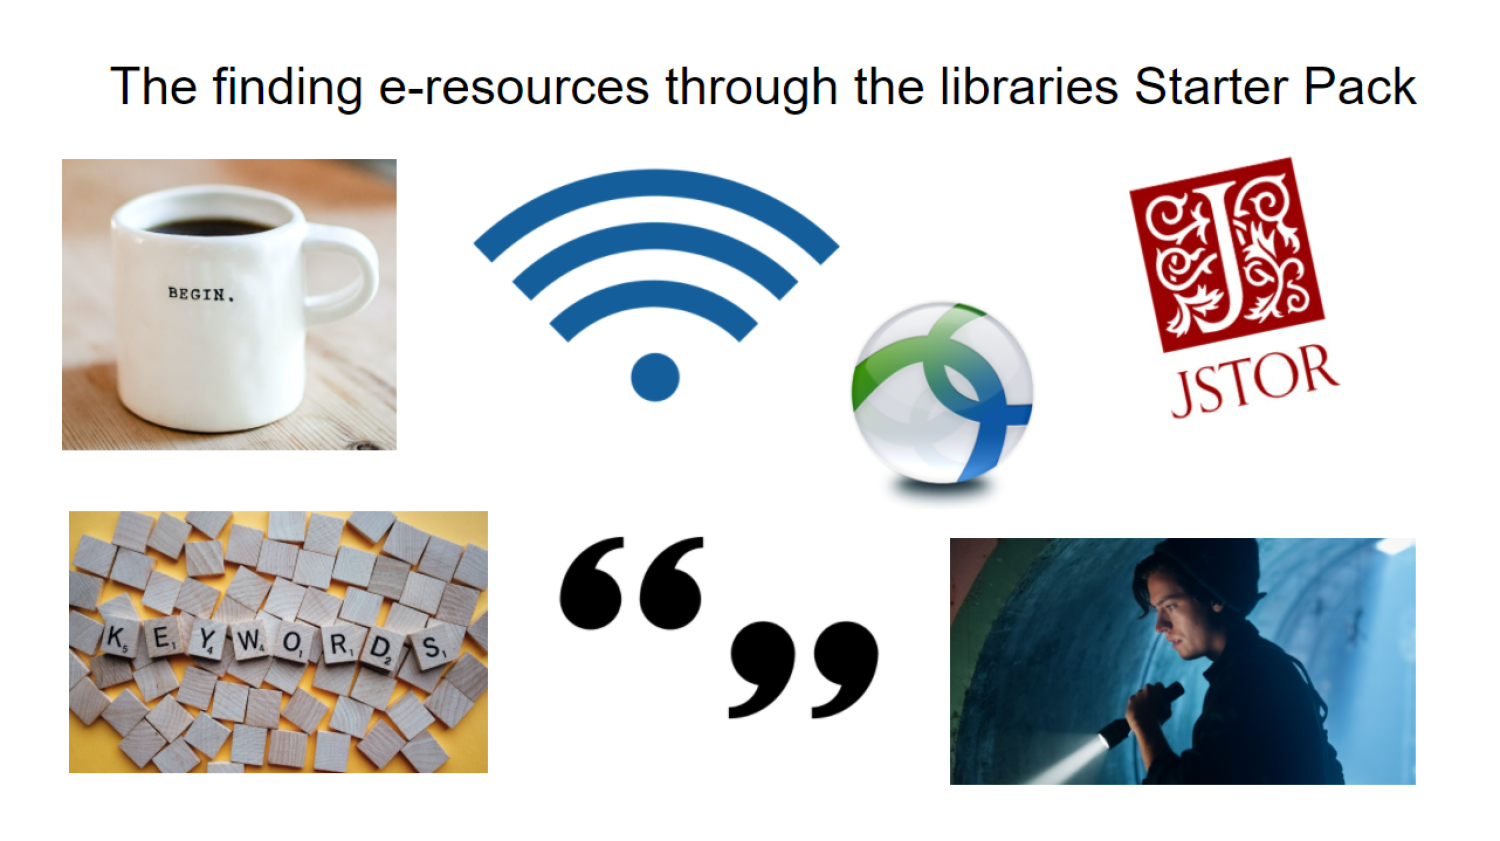 The ‘finding e-resources through the libraries’ starter pack meme